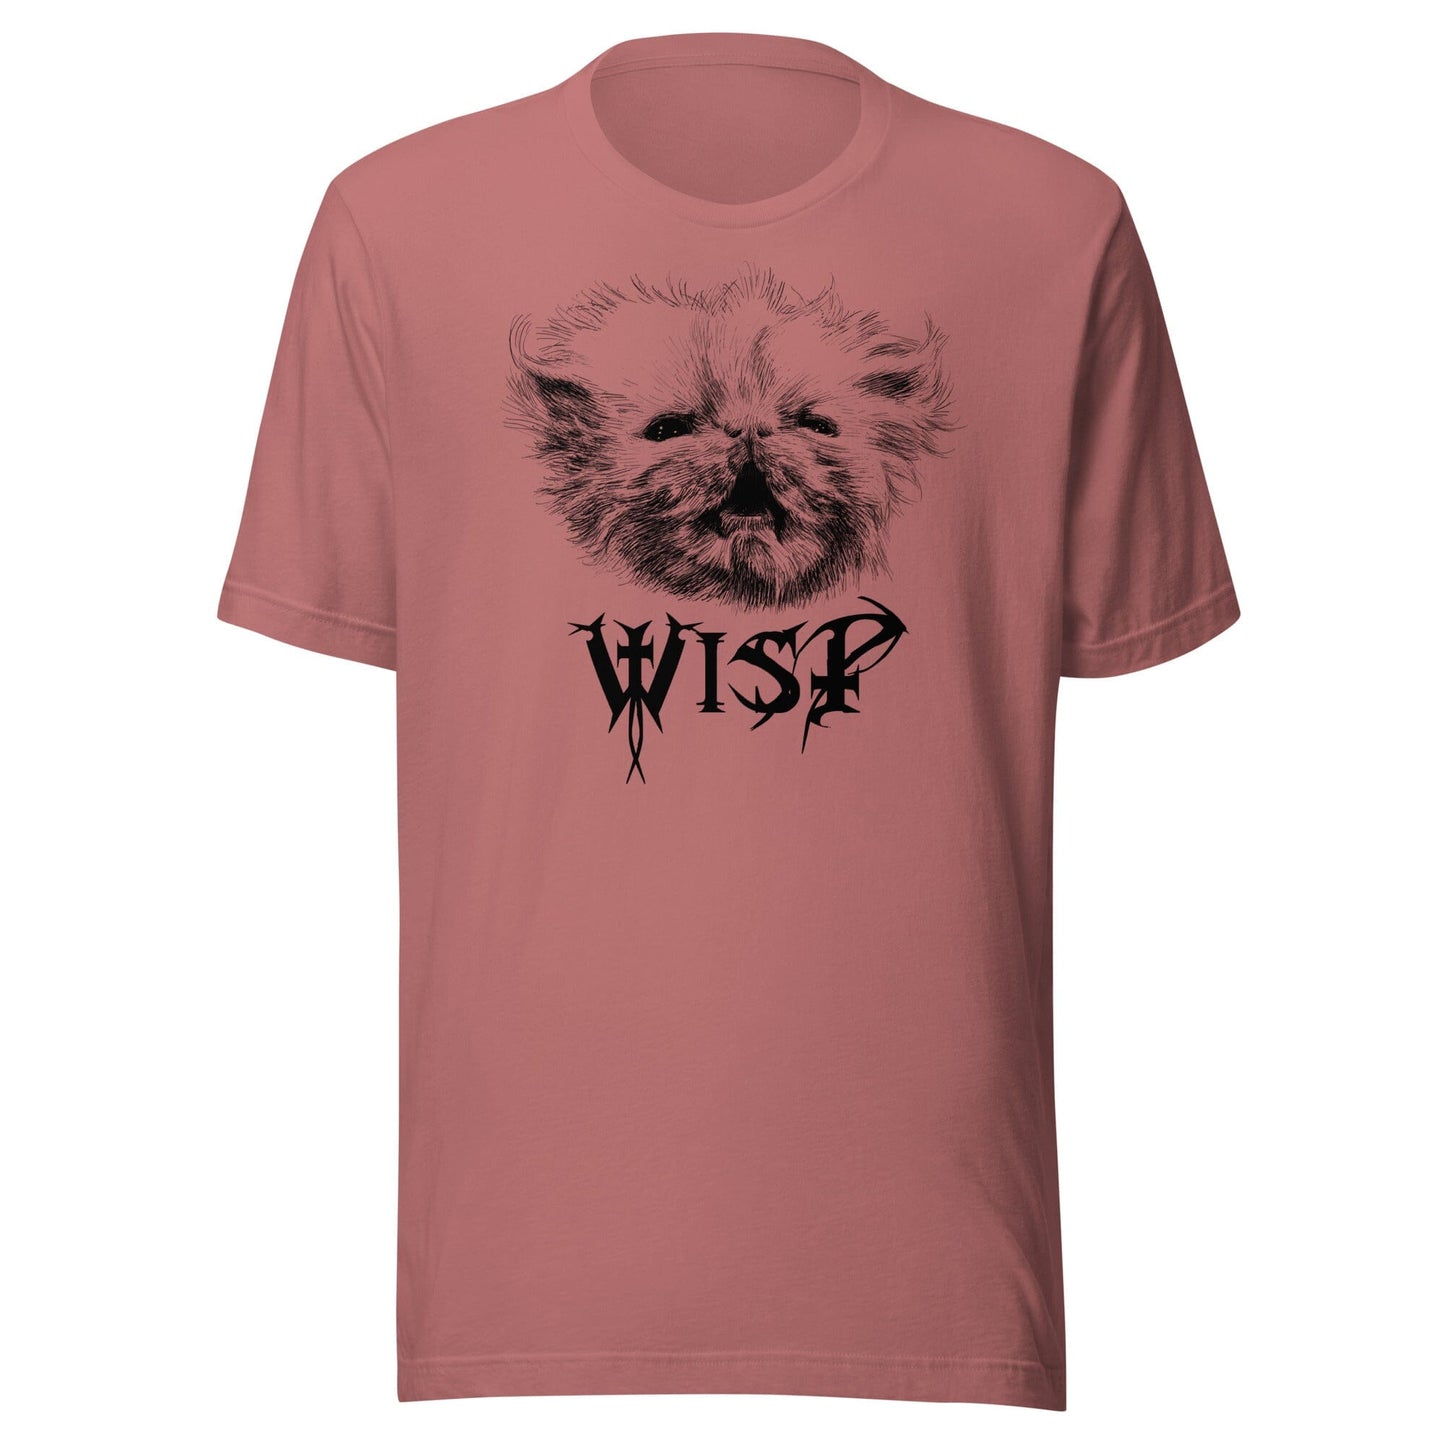 Metal Wisp T-Shirt [Unfoiled] (All net proceeds go to Rags to Riches Animal Rescue) JoyousJoyfulJoyness Mauve S 